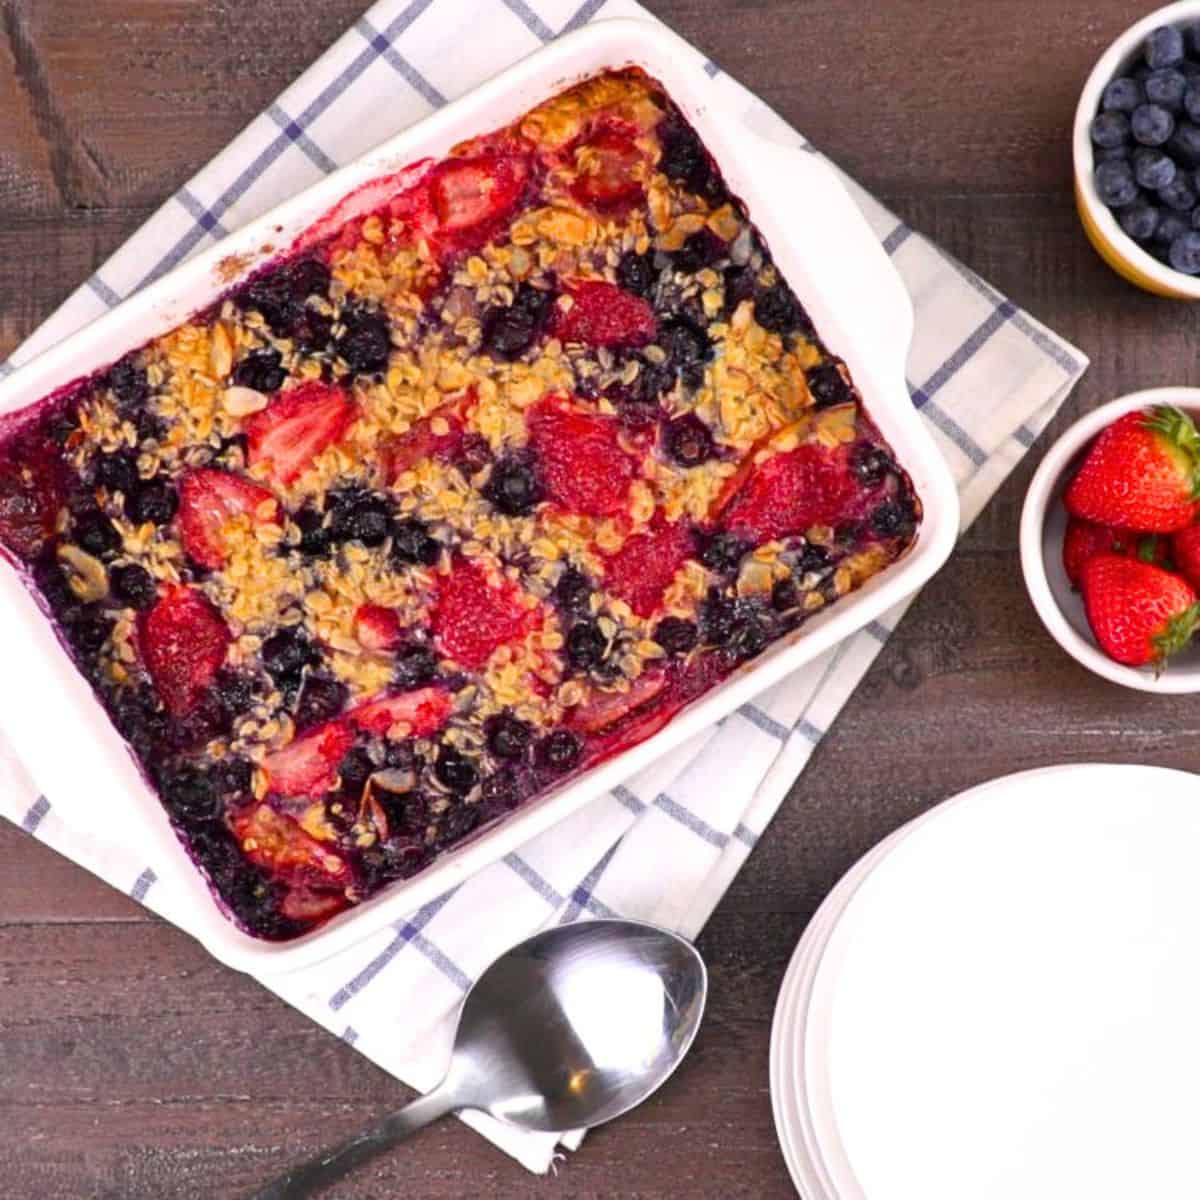 Top down shot of baked oatmeal in casserole showing bueberries and strawberries.